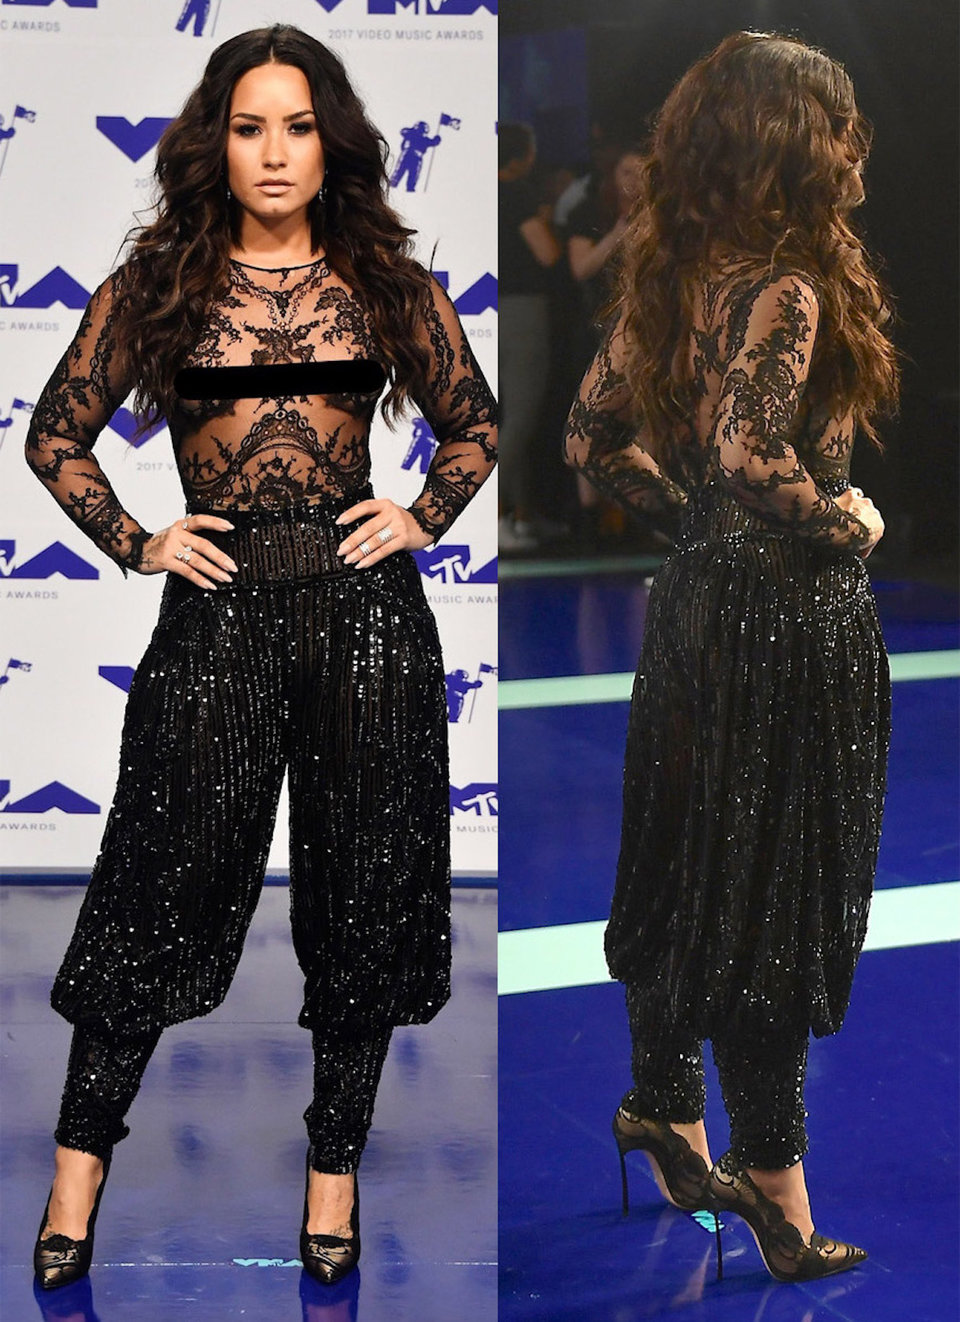 at the mtv video music awards in august 2017 demi lovato wore a completely sheer bodysuit tucked into harem style pants